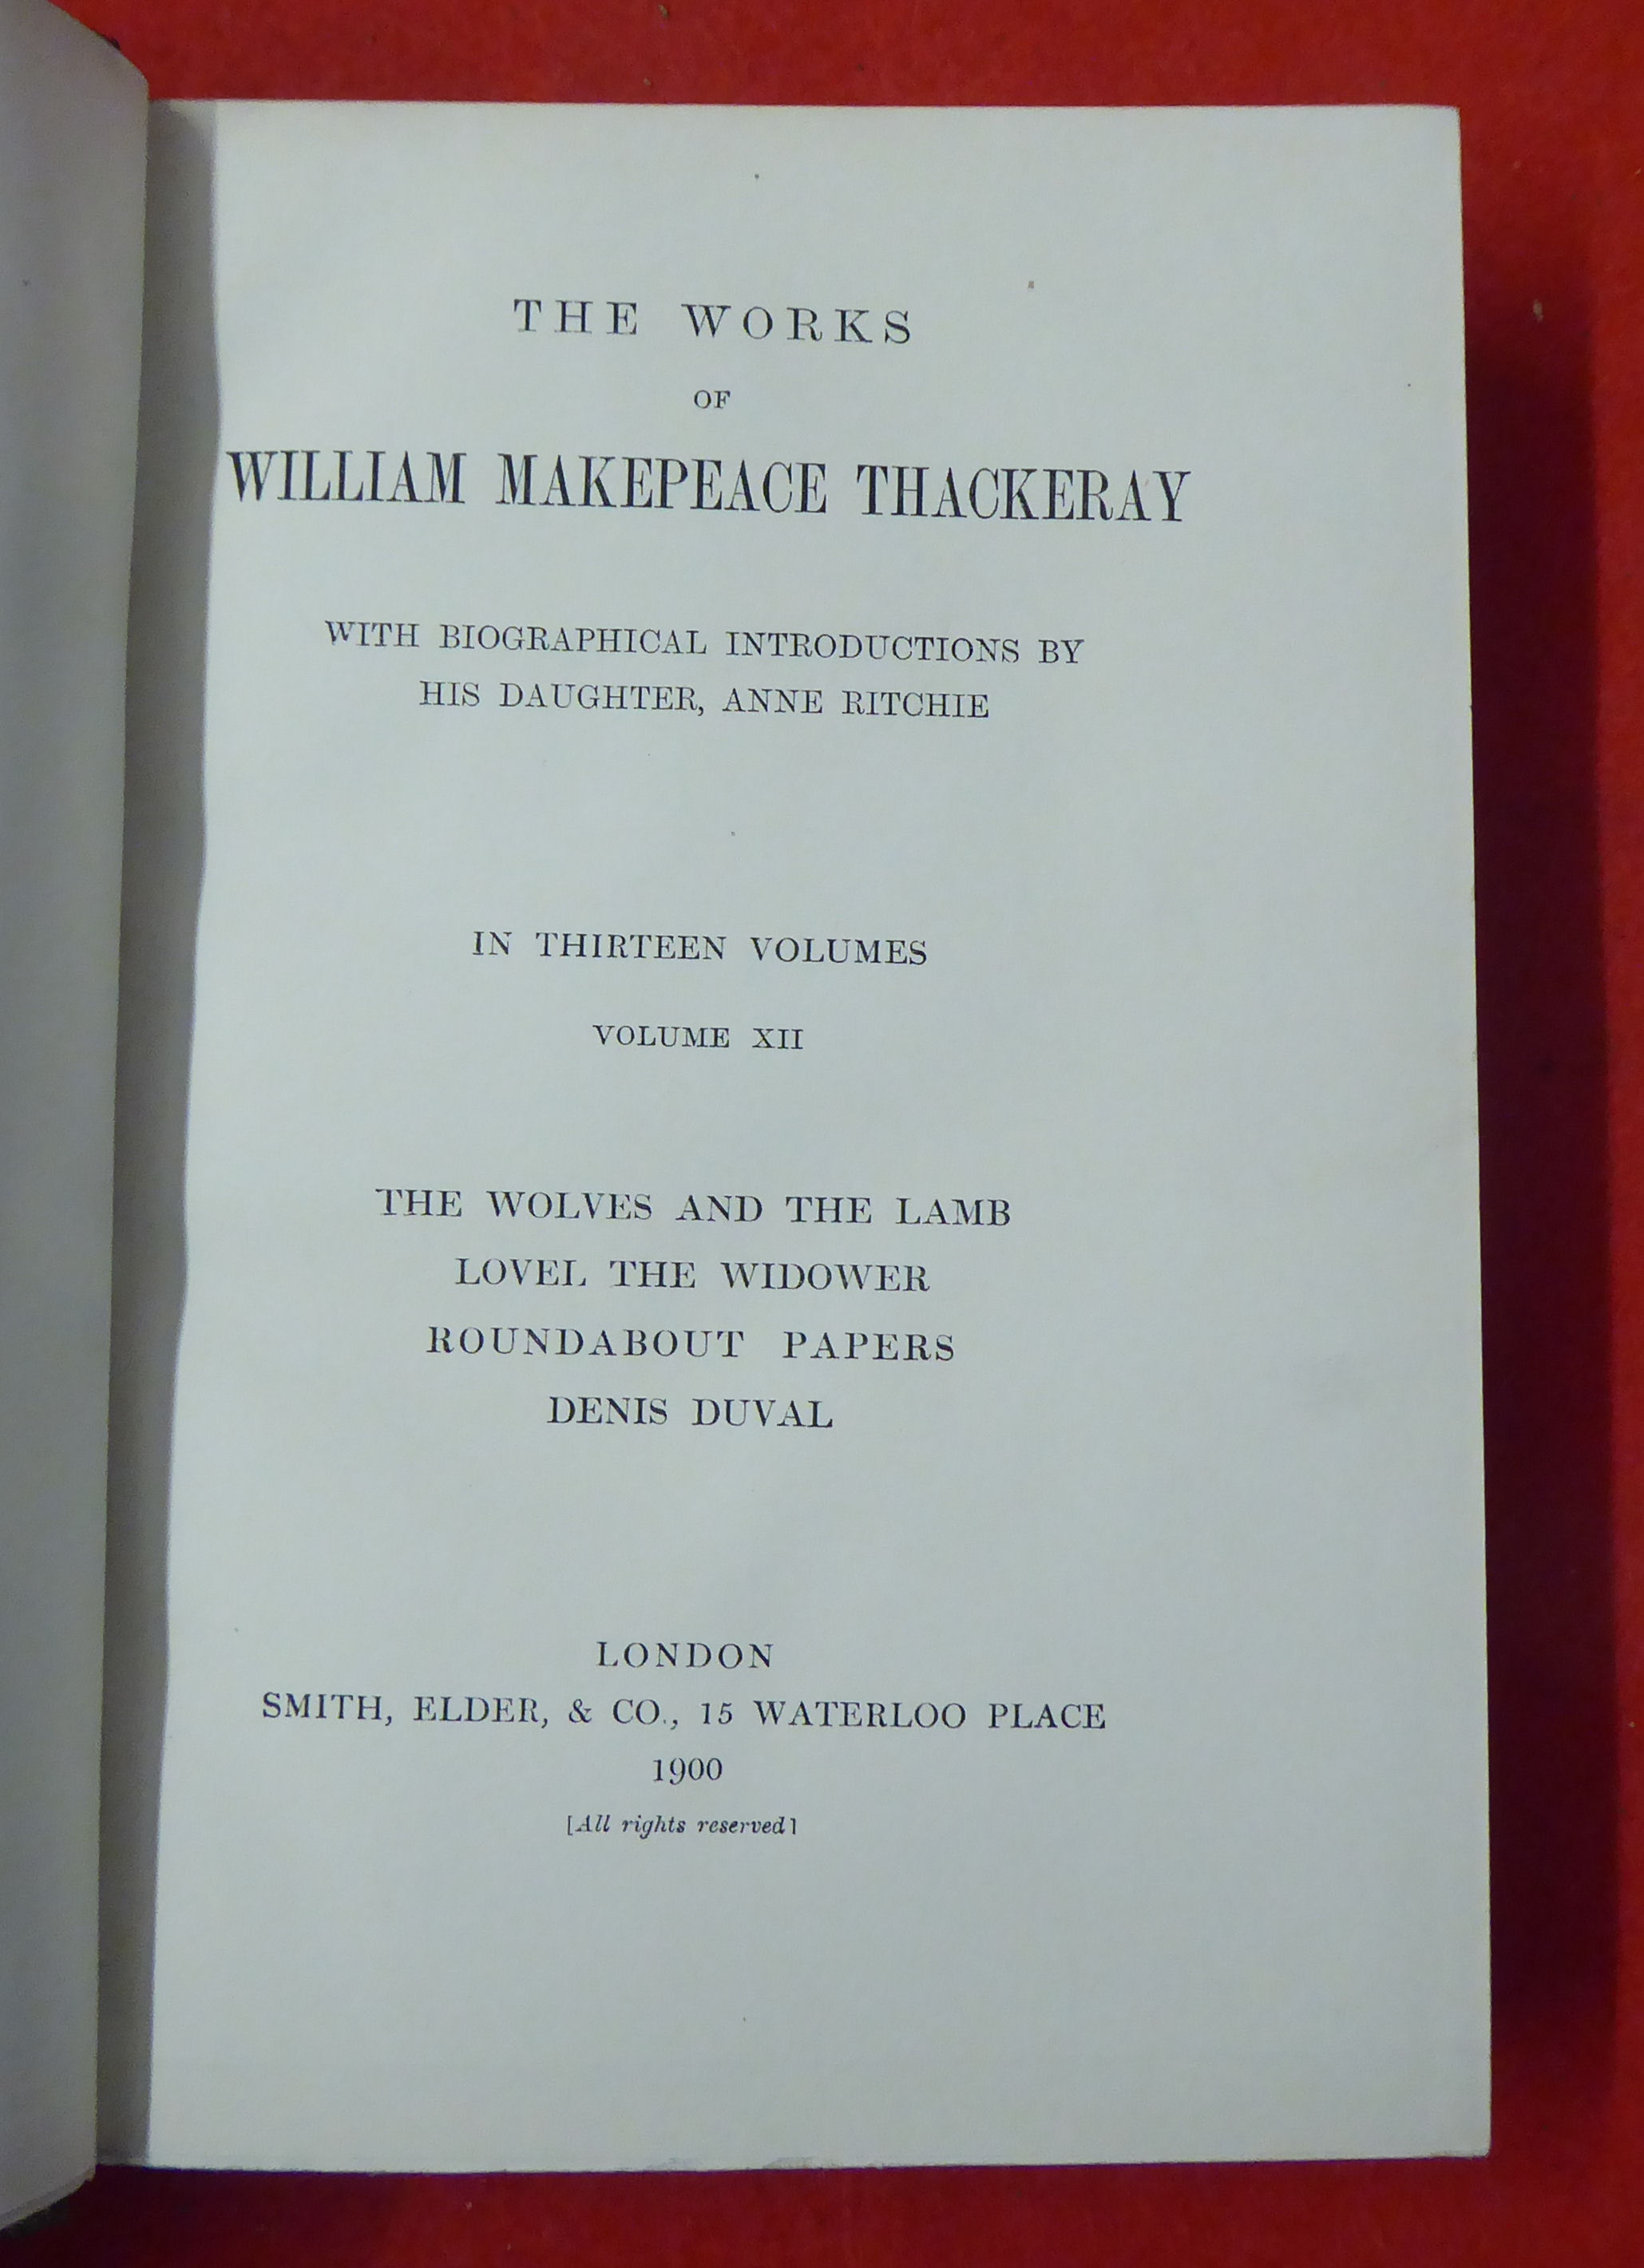 Books: 'The Works of William Makepeace Thackeray'  dated 1900, in thirteen volumes  (volume seven - Image 15 of 16